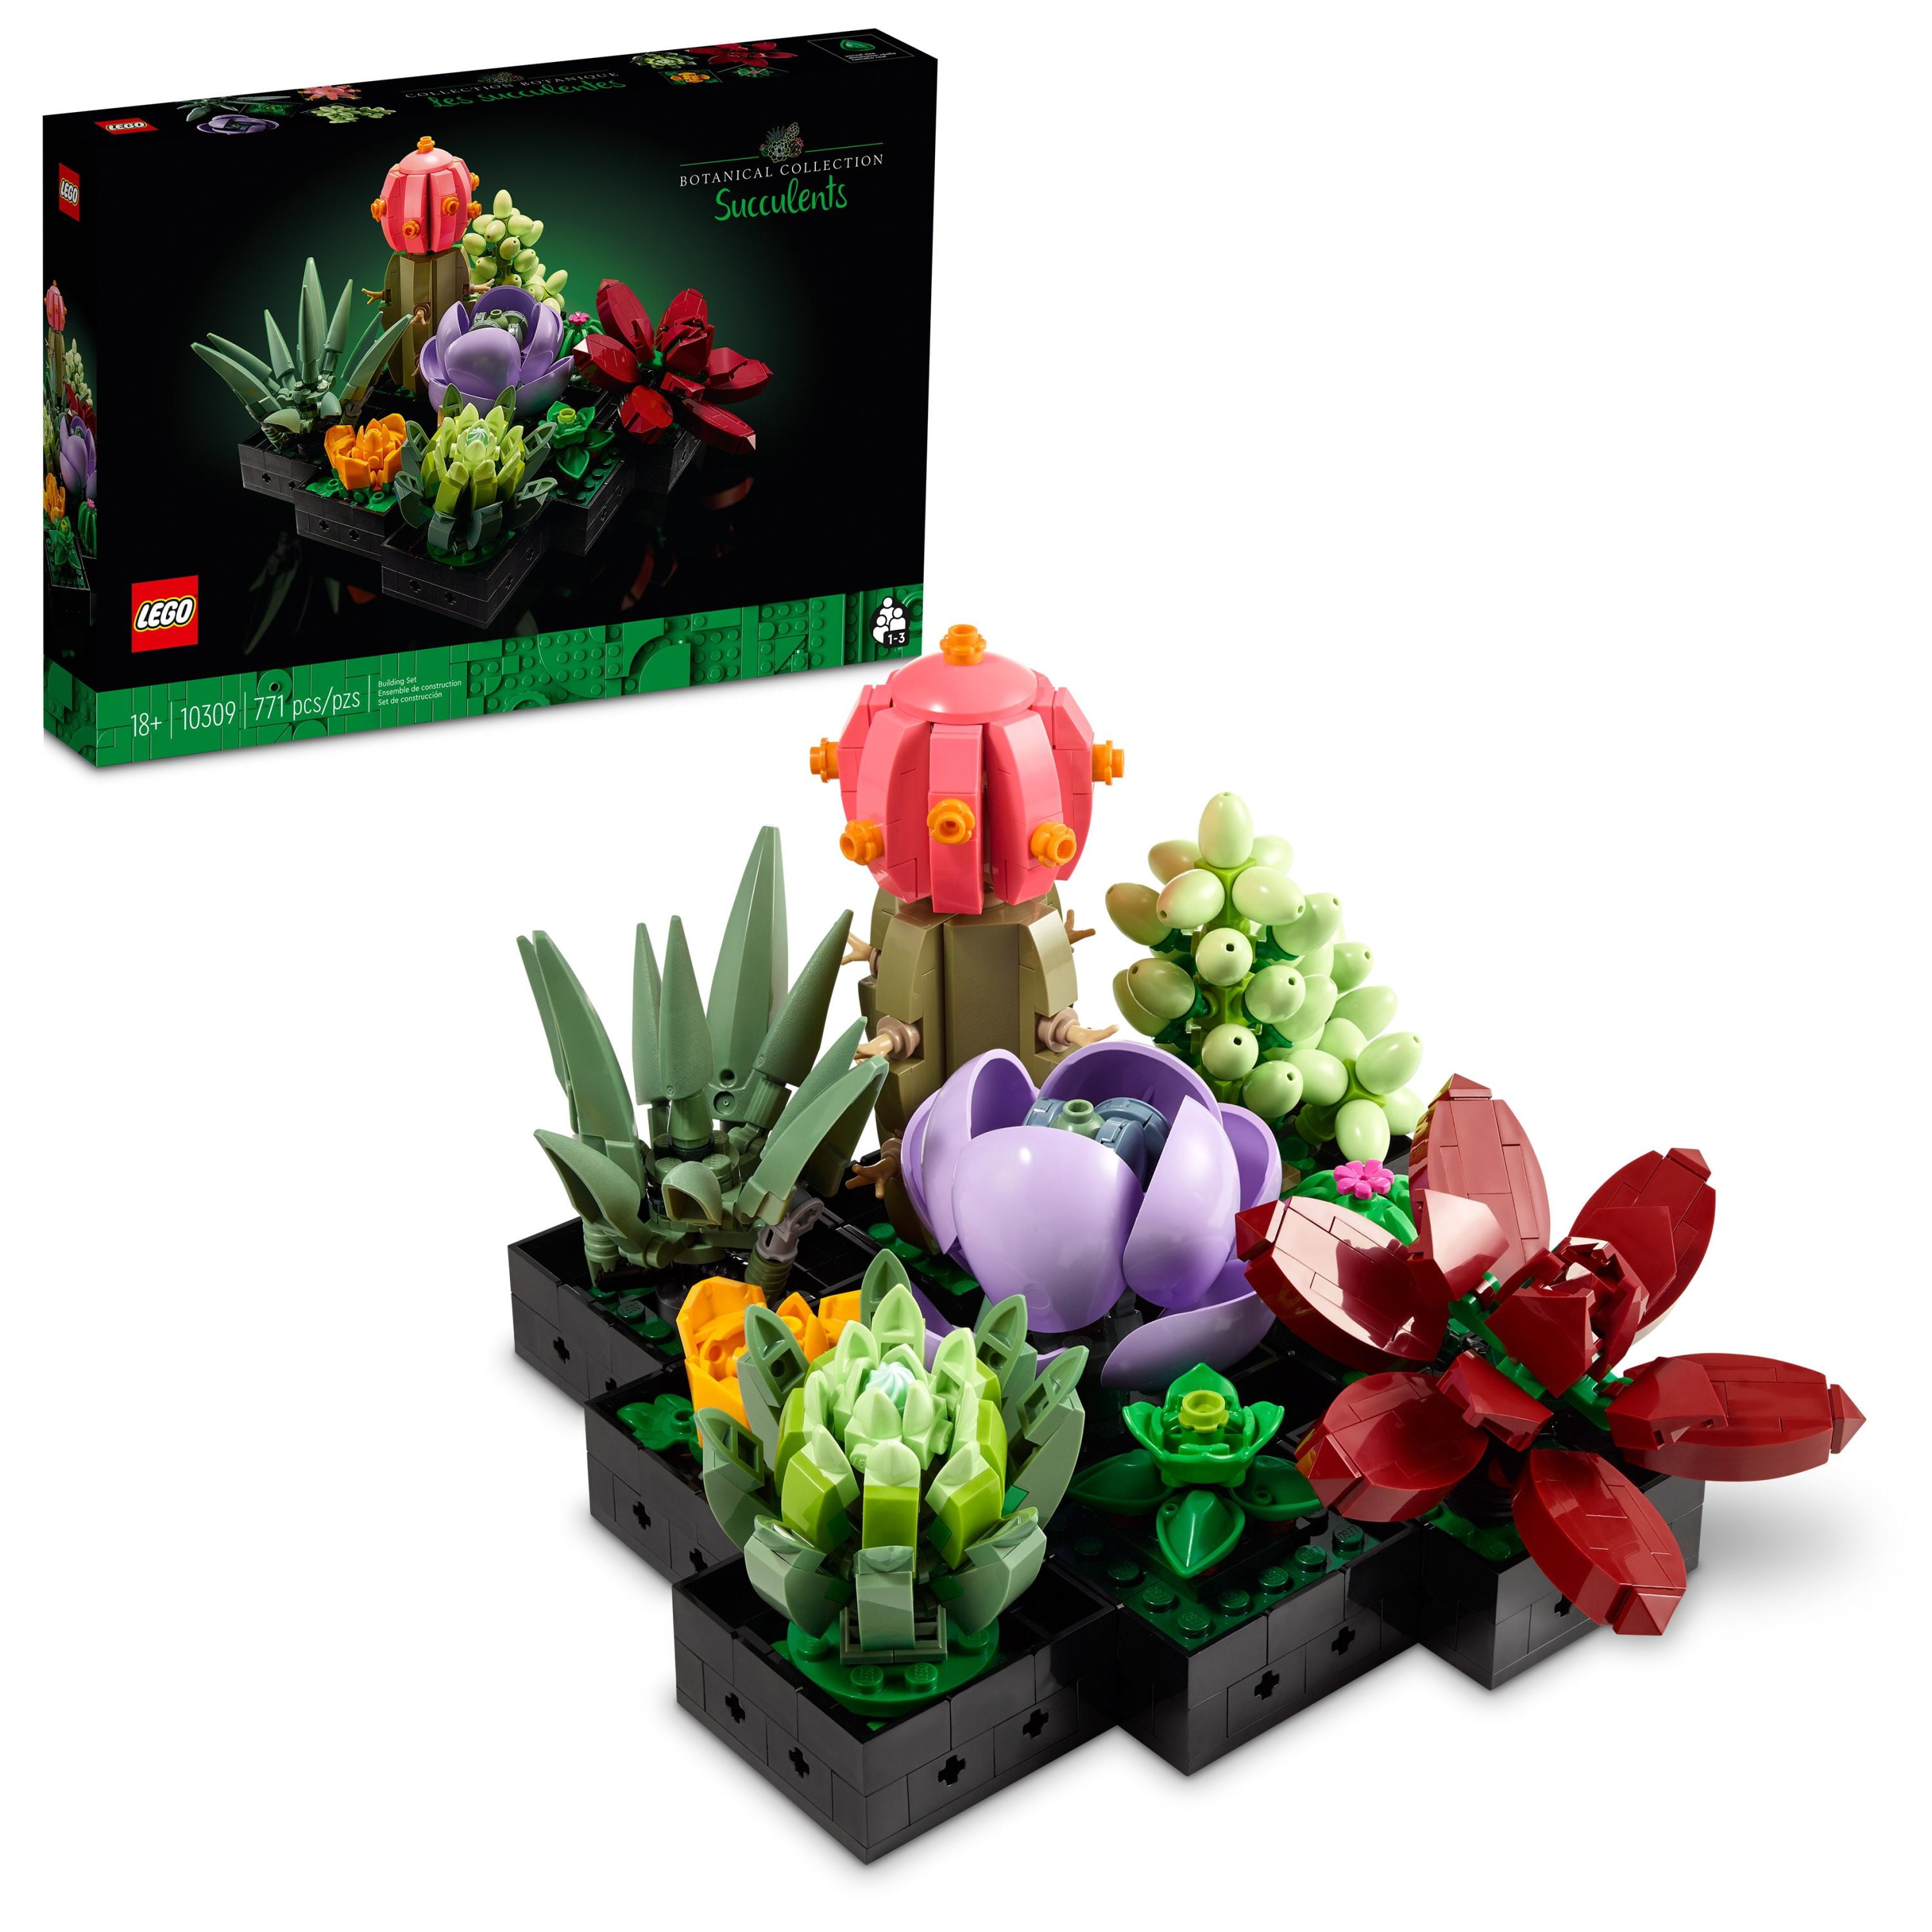 LEGO Icons Succulents 10309 Artificial Plants Set for Adults, Home Décor,  Birthday and Mother's Day Gift, Creative Housewarming Gifts, Botanical  Collection 